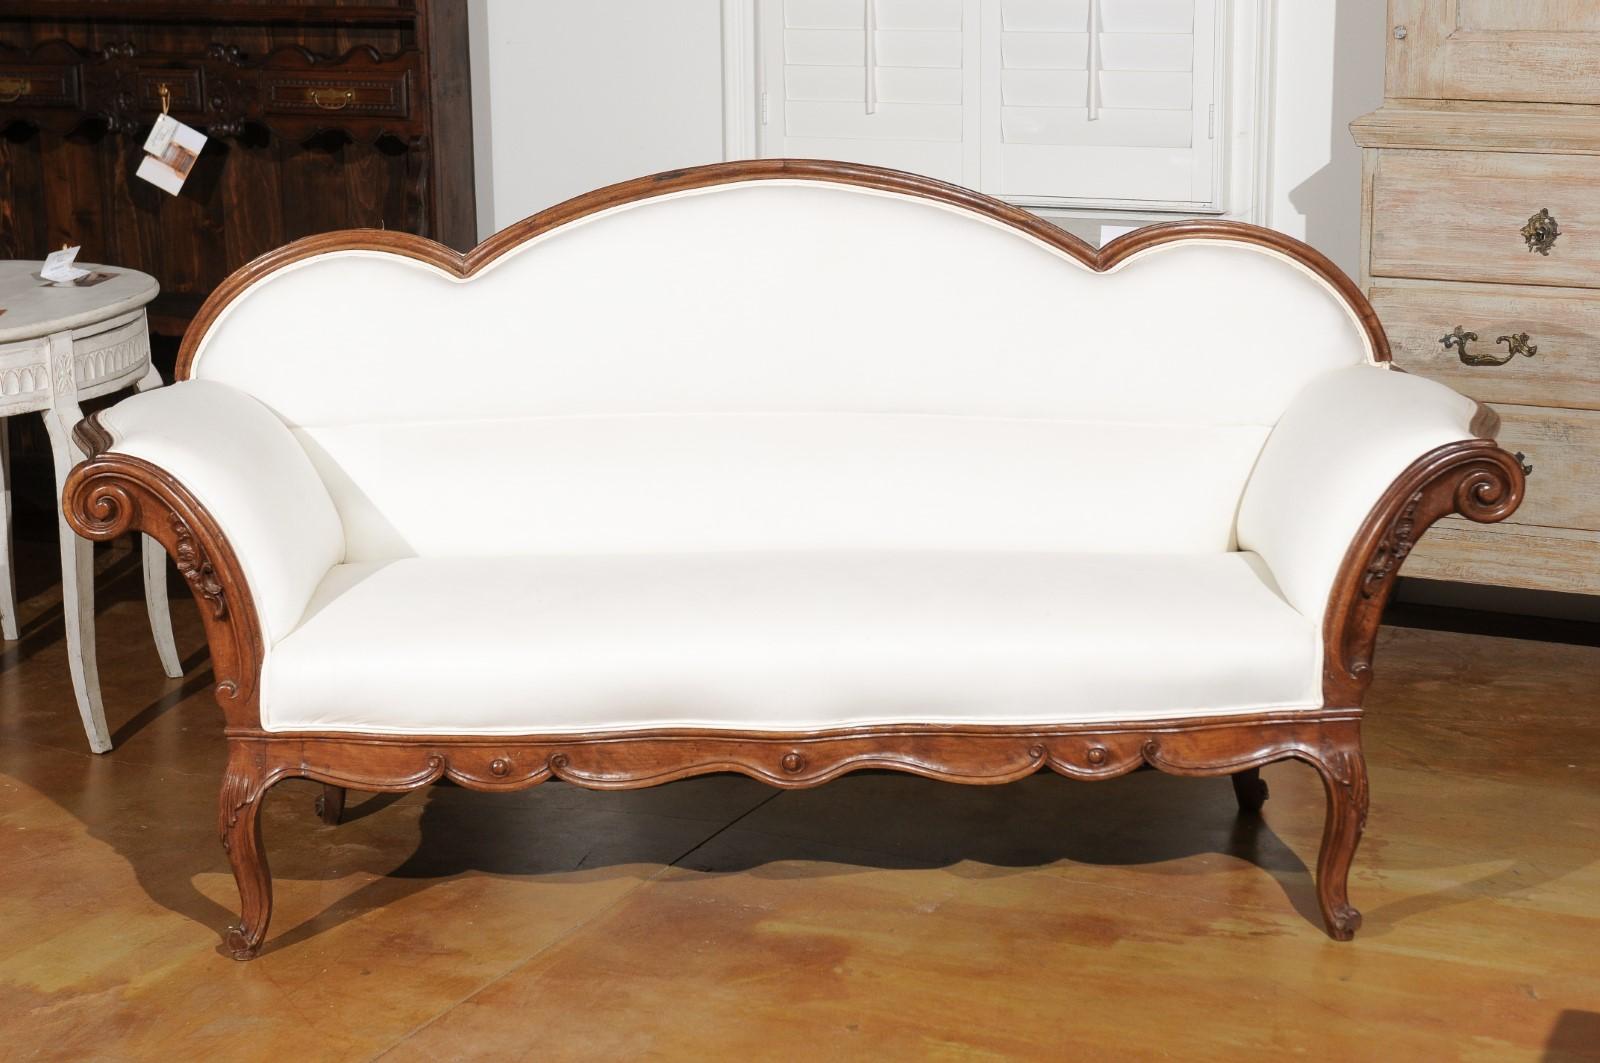 Italian 1750s Walnut Tripled Arched Sofa from Lombardy with New Upholstery For Sale 1